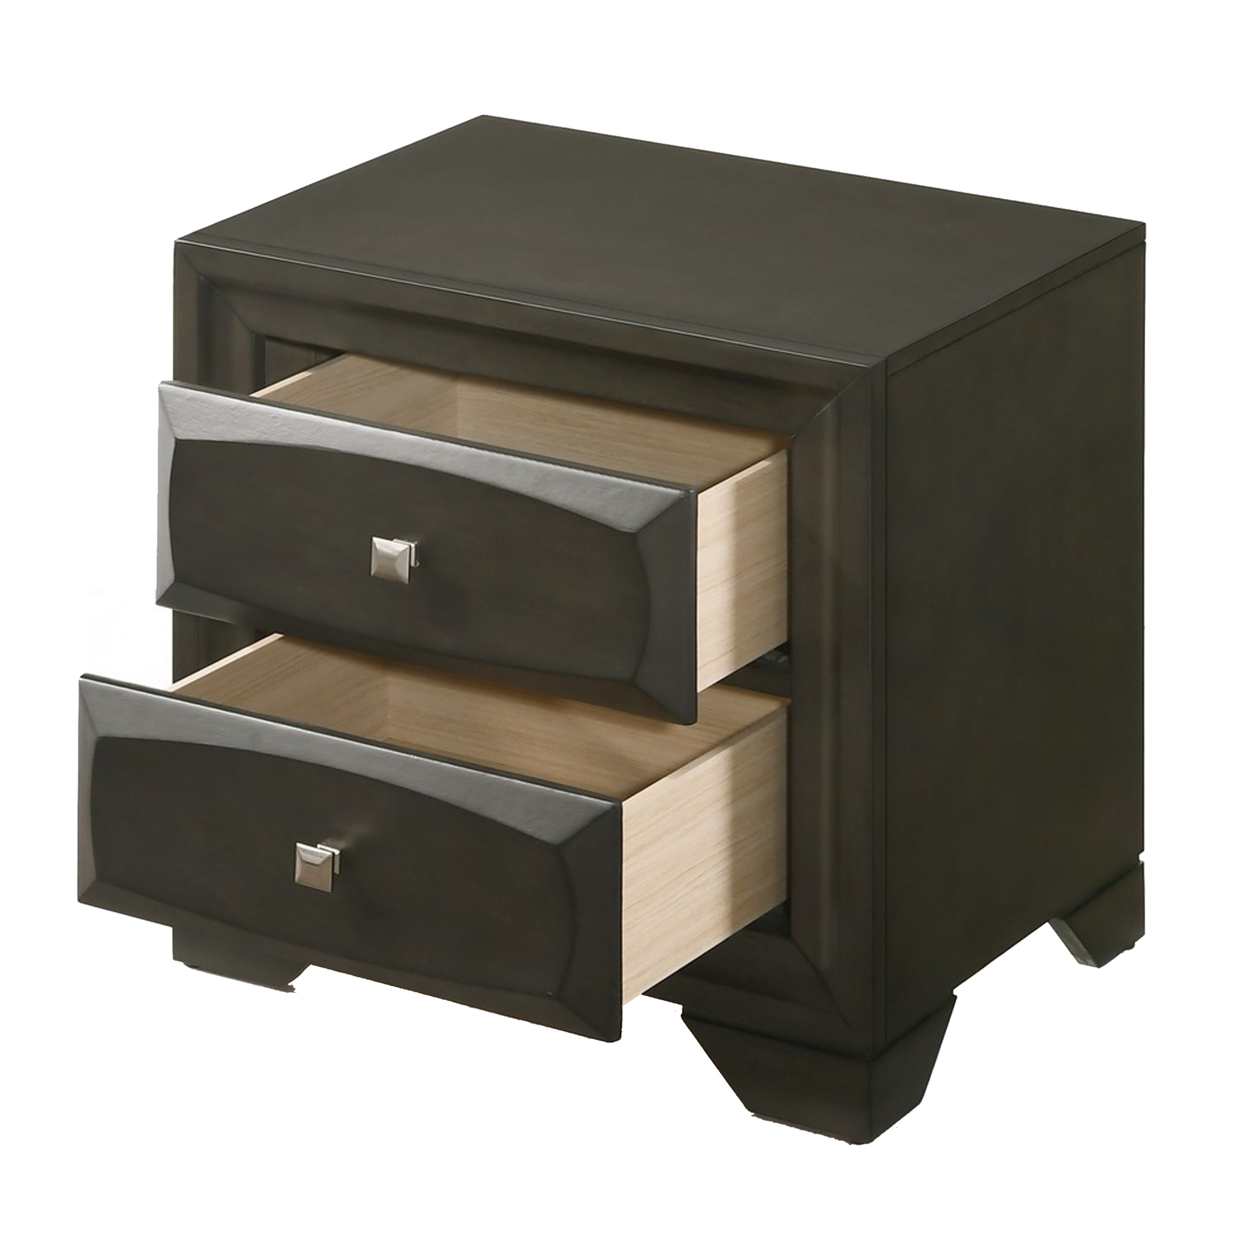 Two Drawer Nightstand With Brushed Nickel Accent And Chamfered Legs, Antique Gray- Saltoro Sherpi